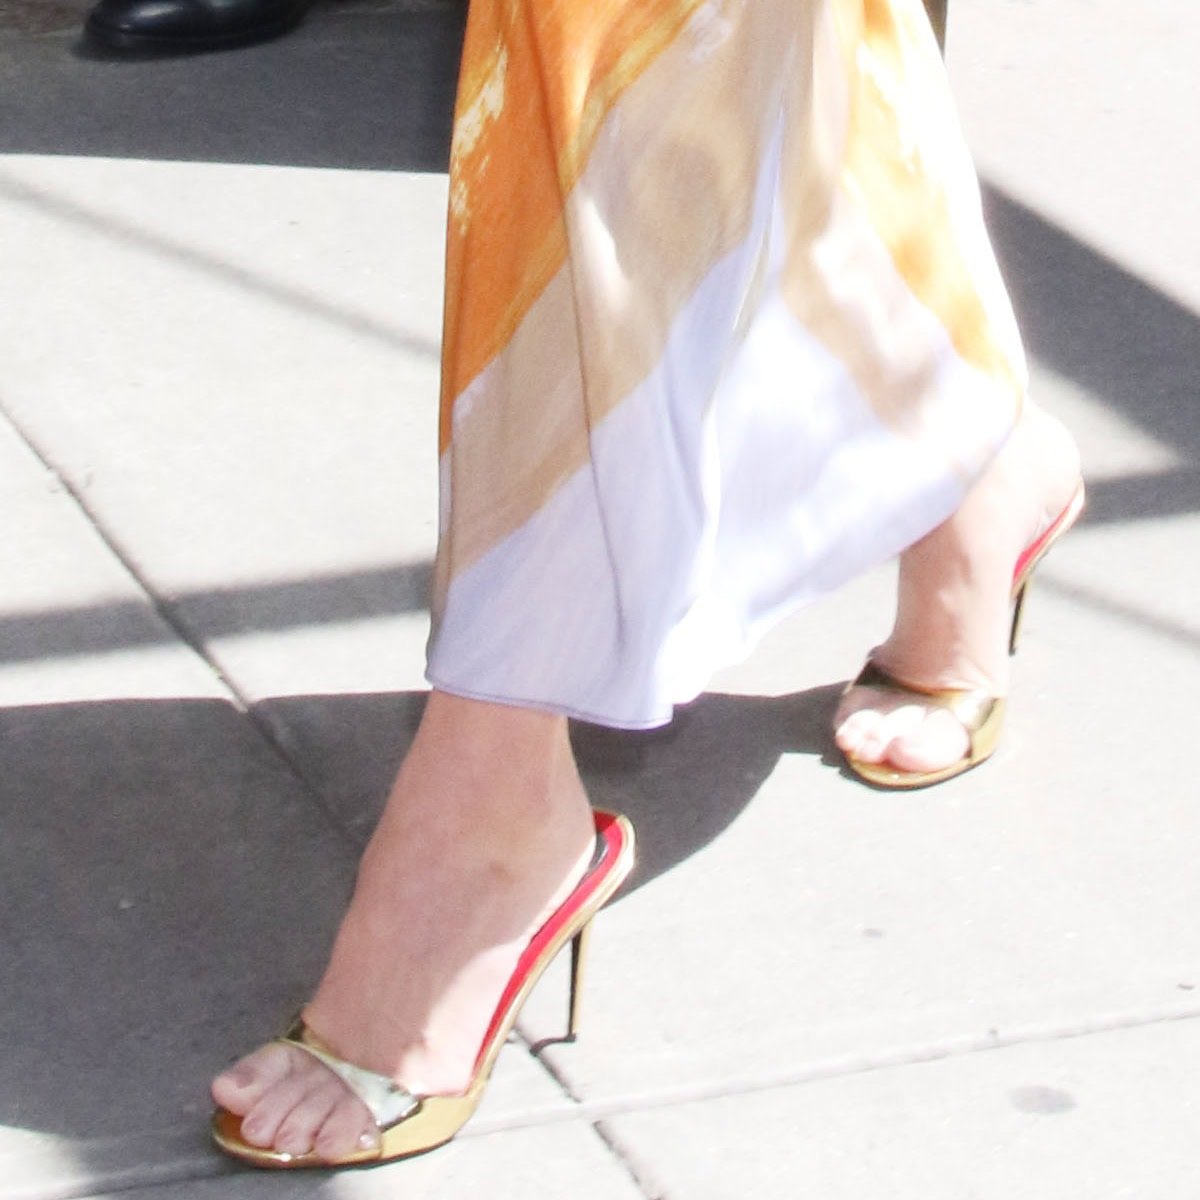 A closer look at Olivia Munn's golden Maison Ernest 'Lidylle' mules, pairing perfectly with her vibrant attire and adding a touch of glamour to her daytime look